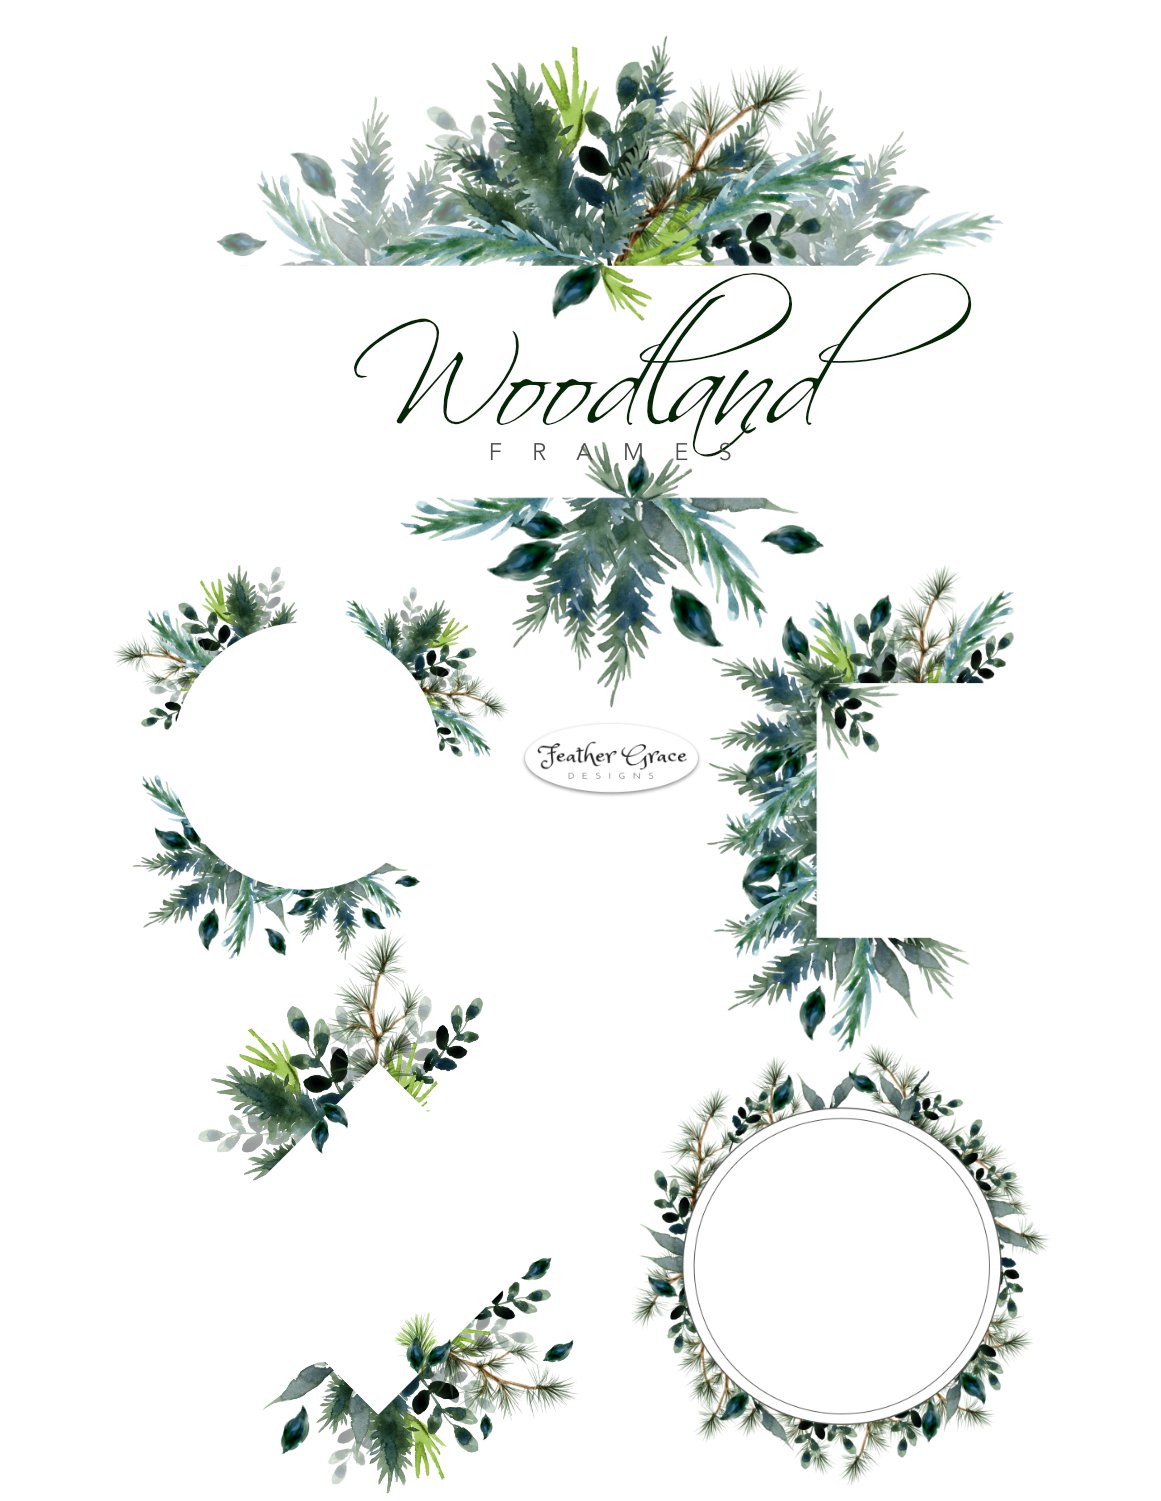 Set of watercolor christmas wreaths on a white background.